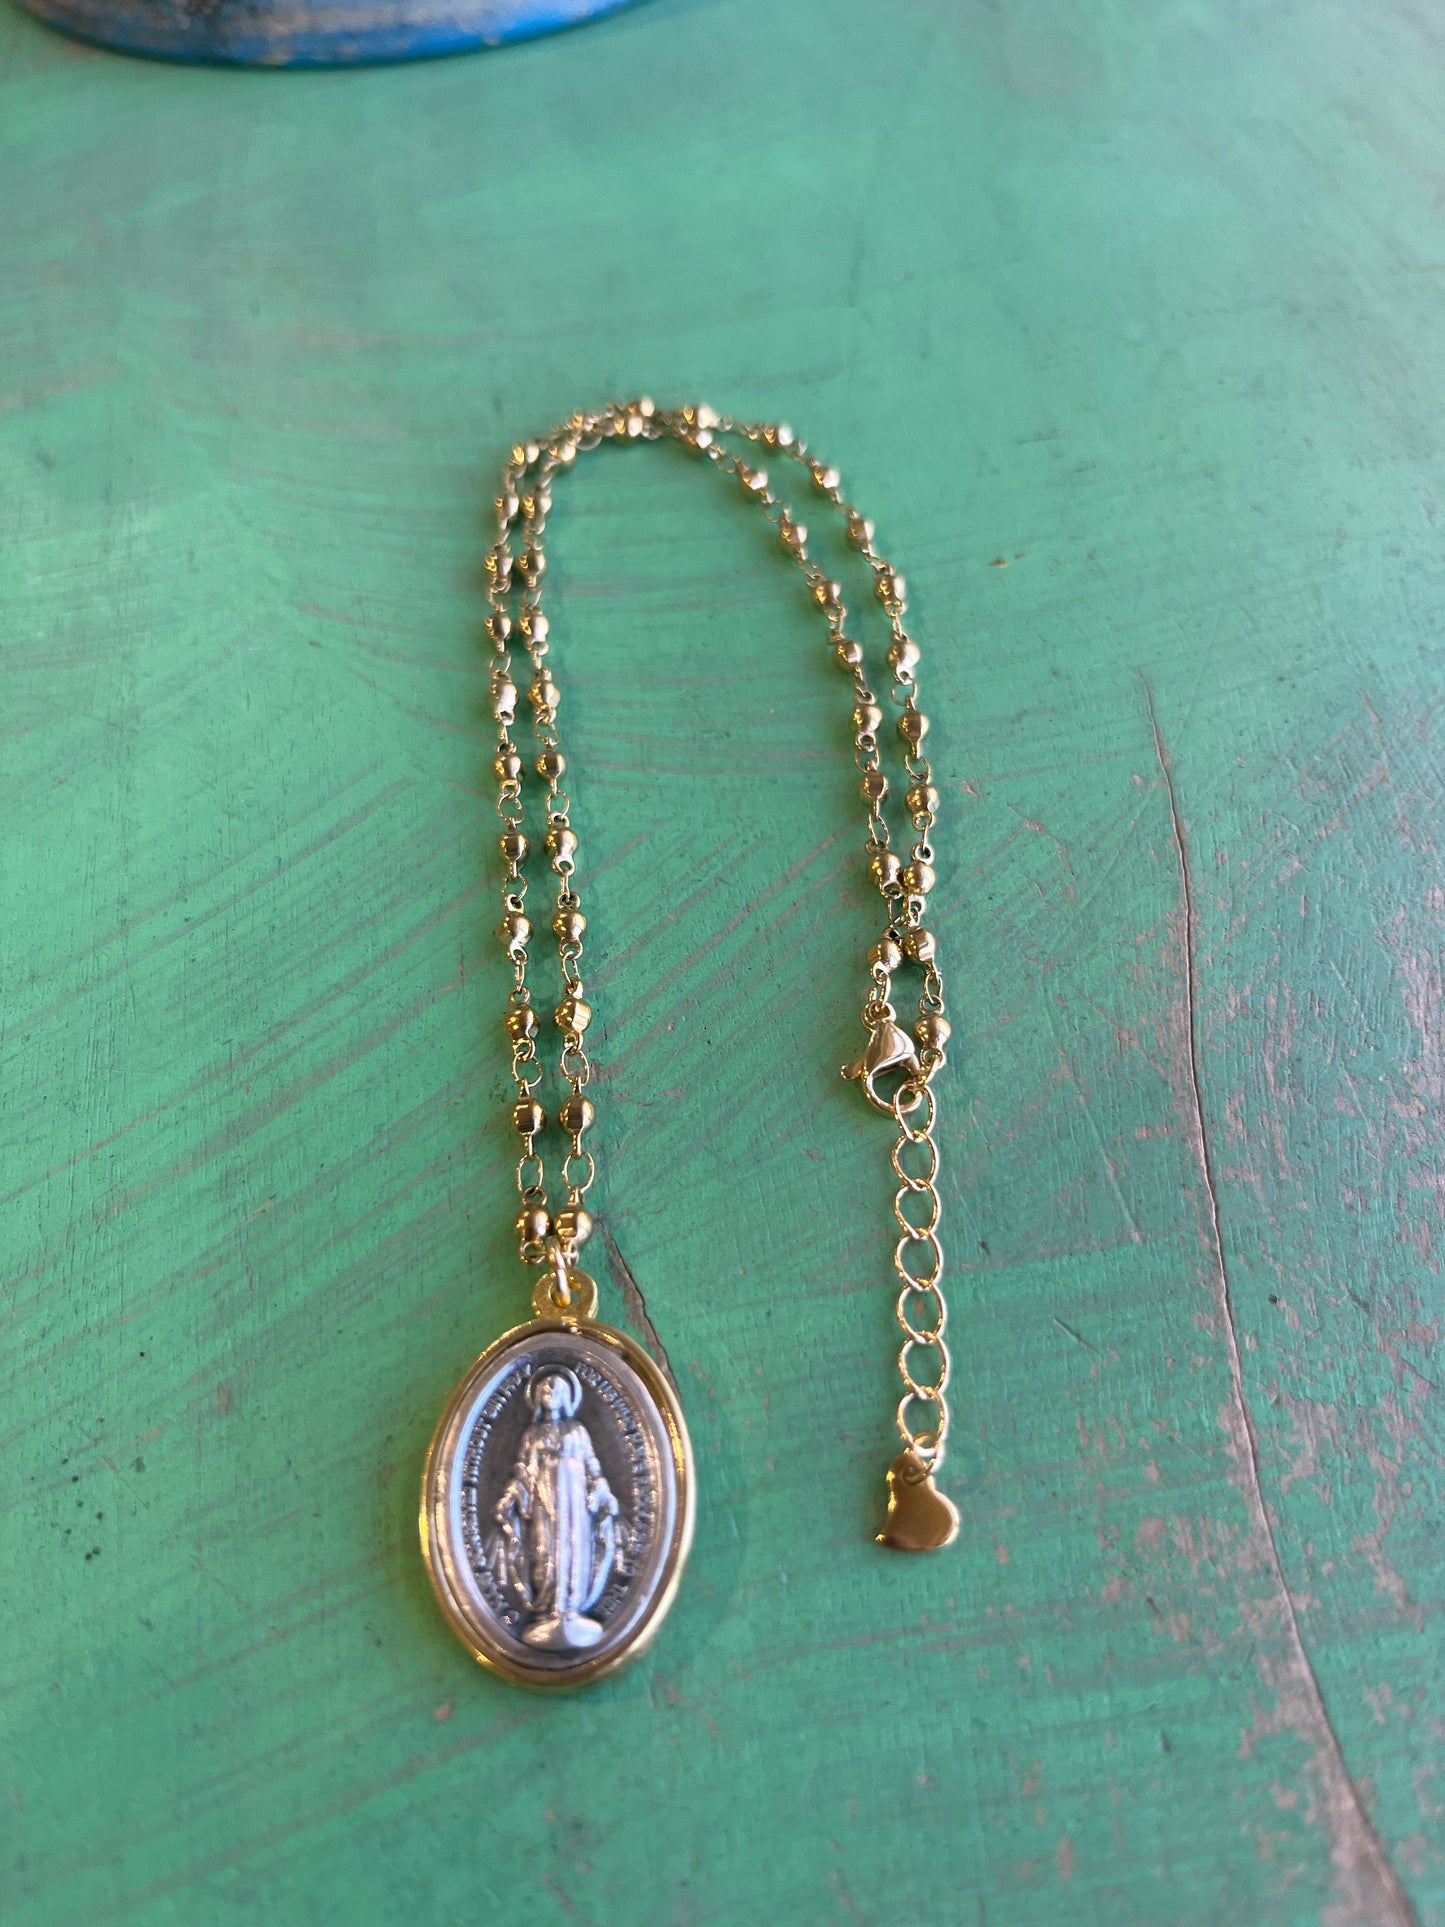 Miraculous Medal or Divine Mercy Necklace